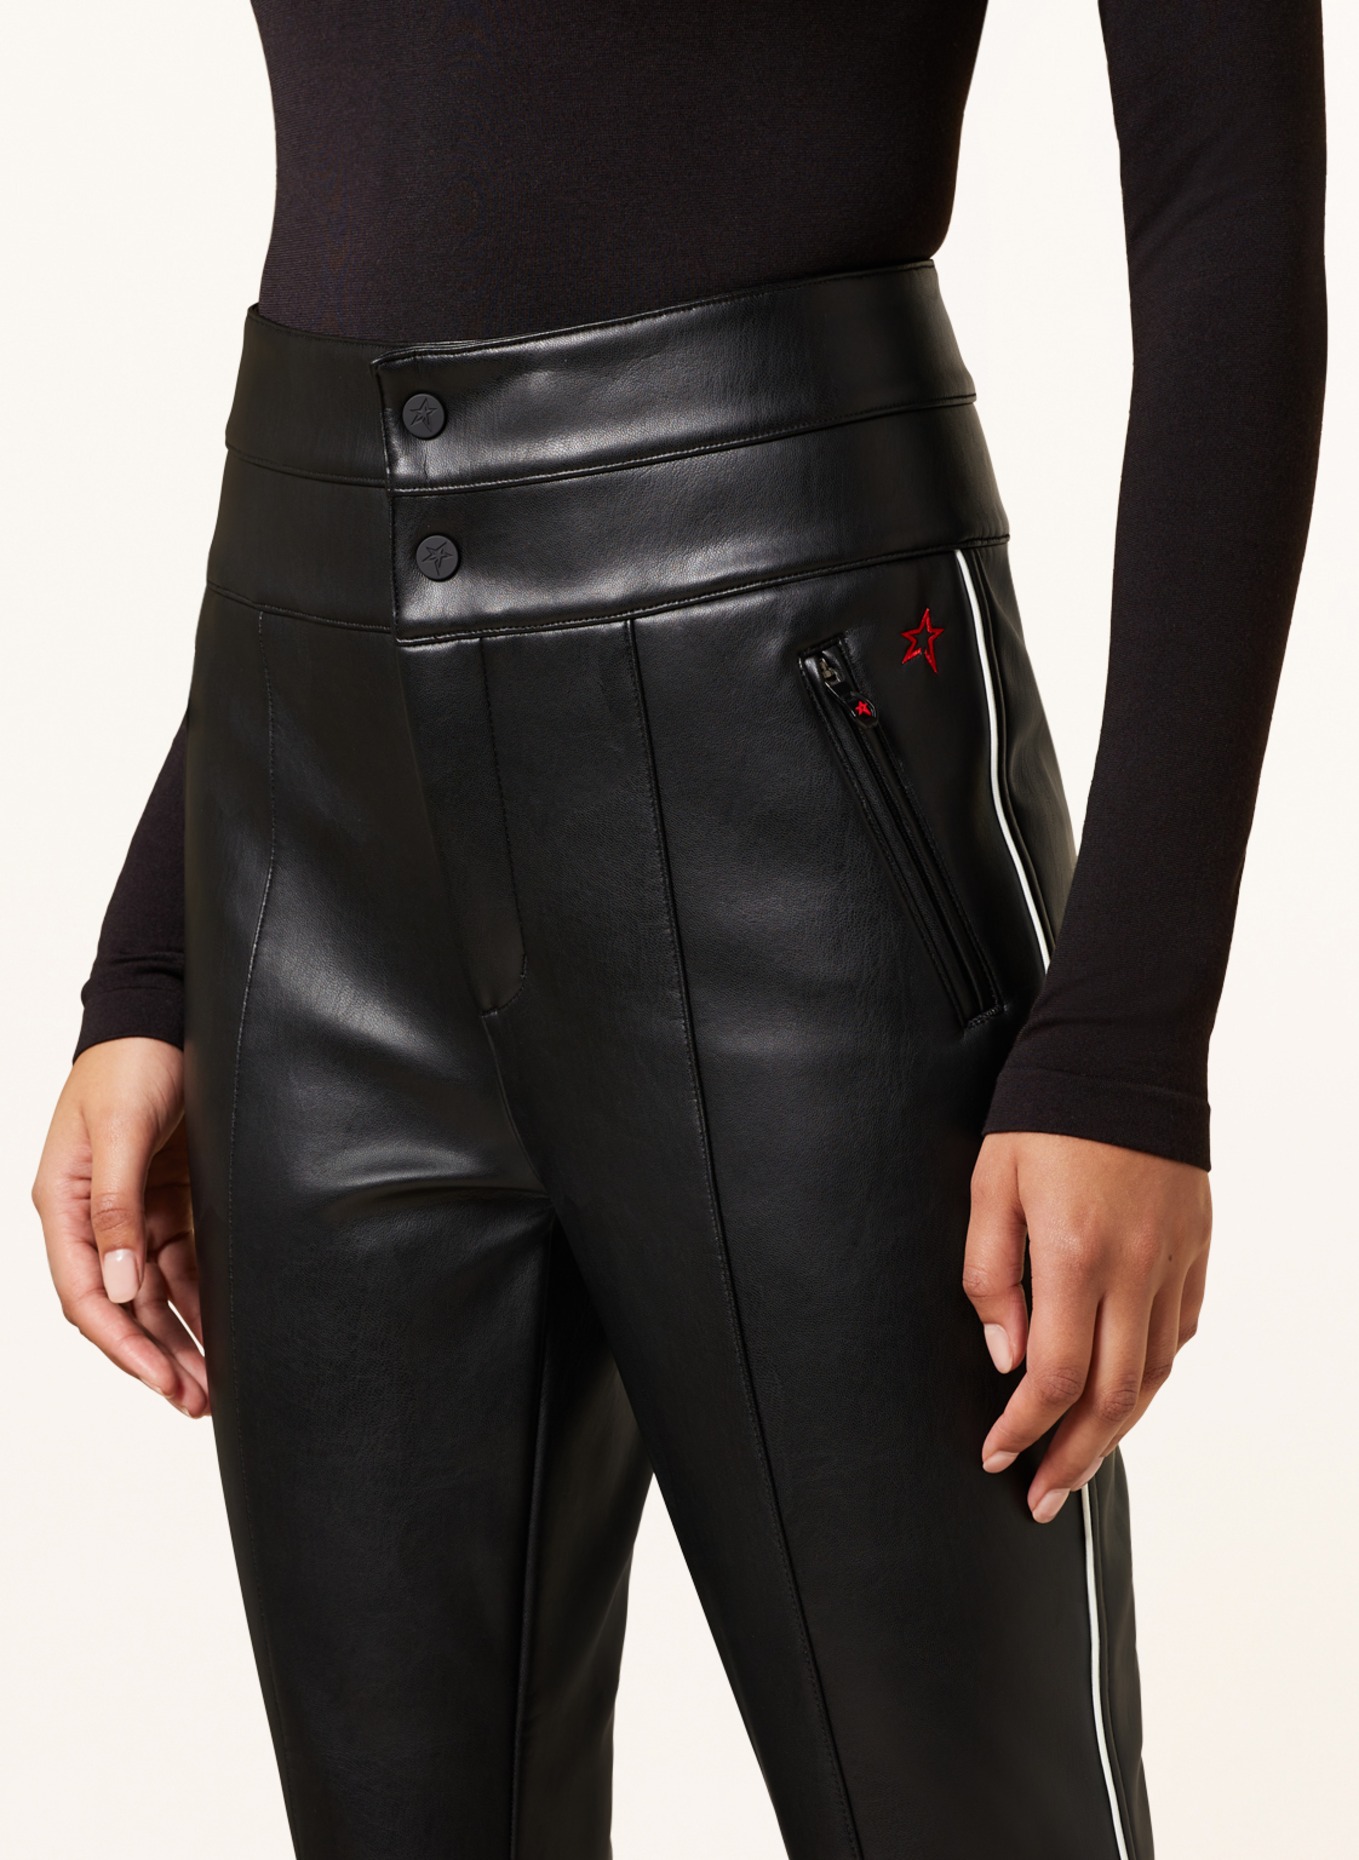 PERFECT MOMENT Stirrup ski pants AURORA in leather look, Color: BLACK (Image 5)